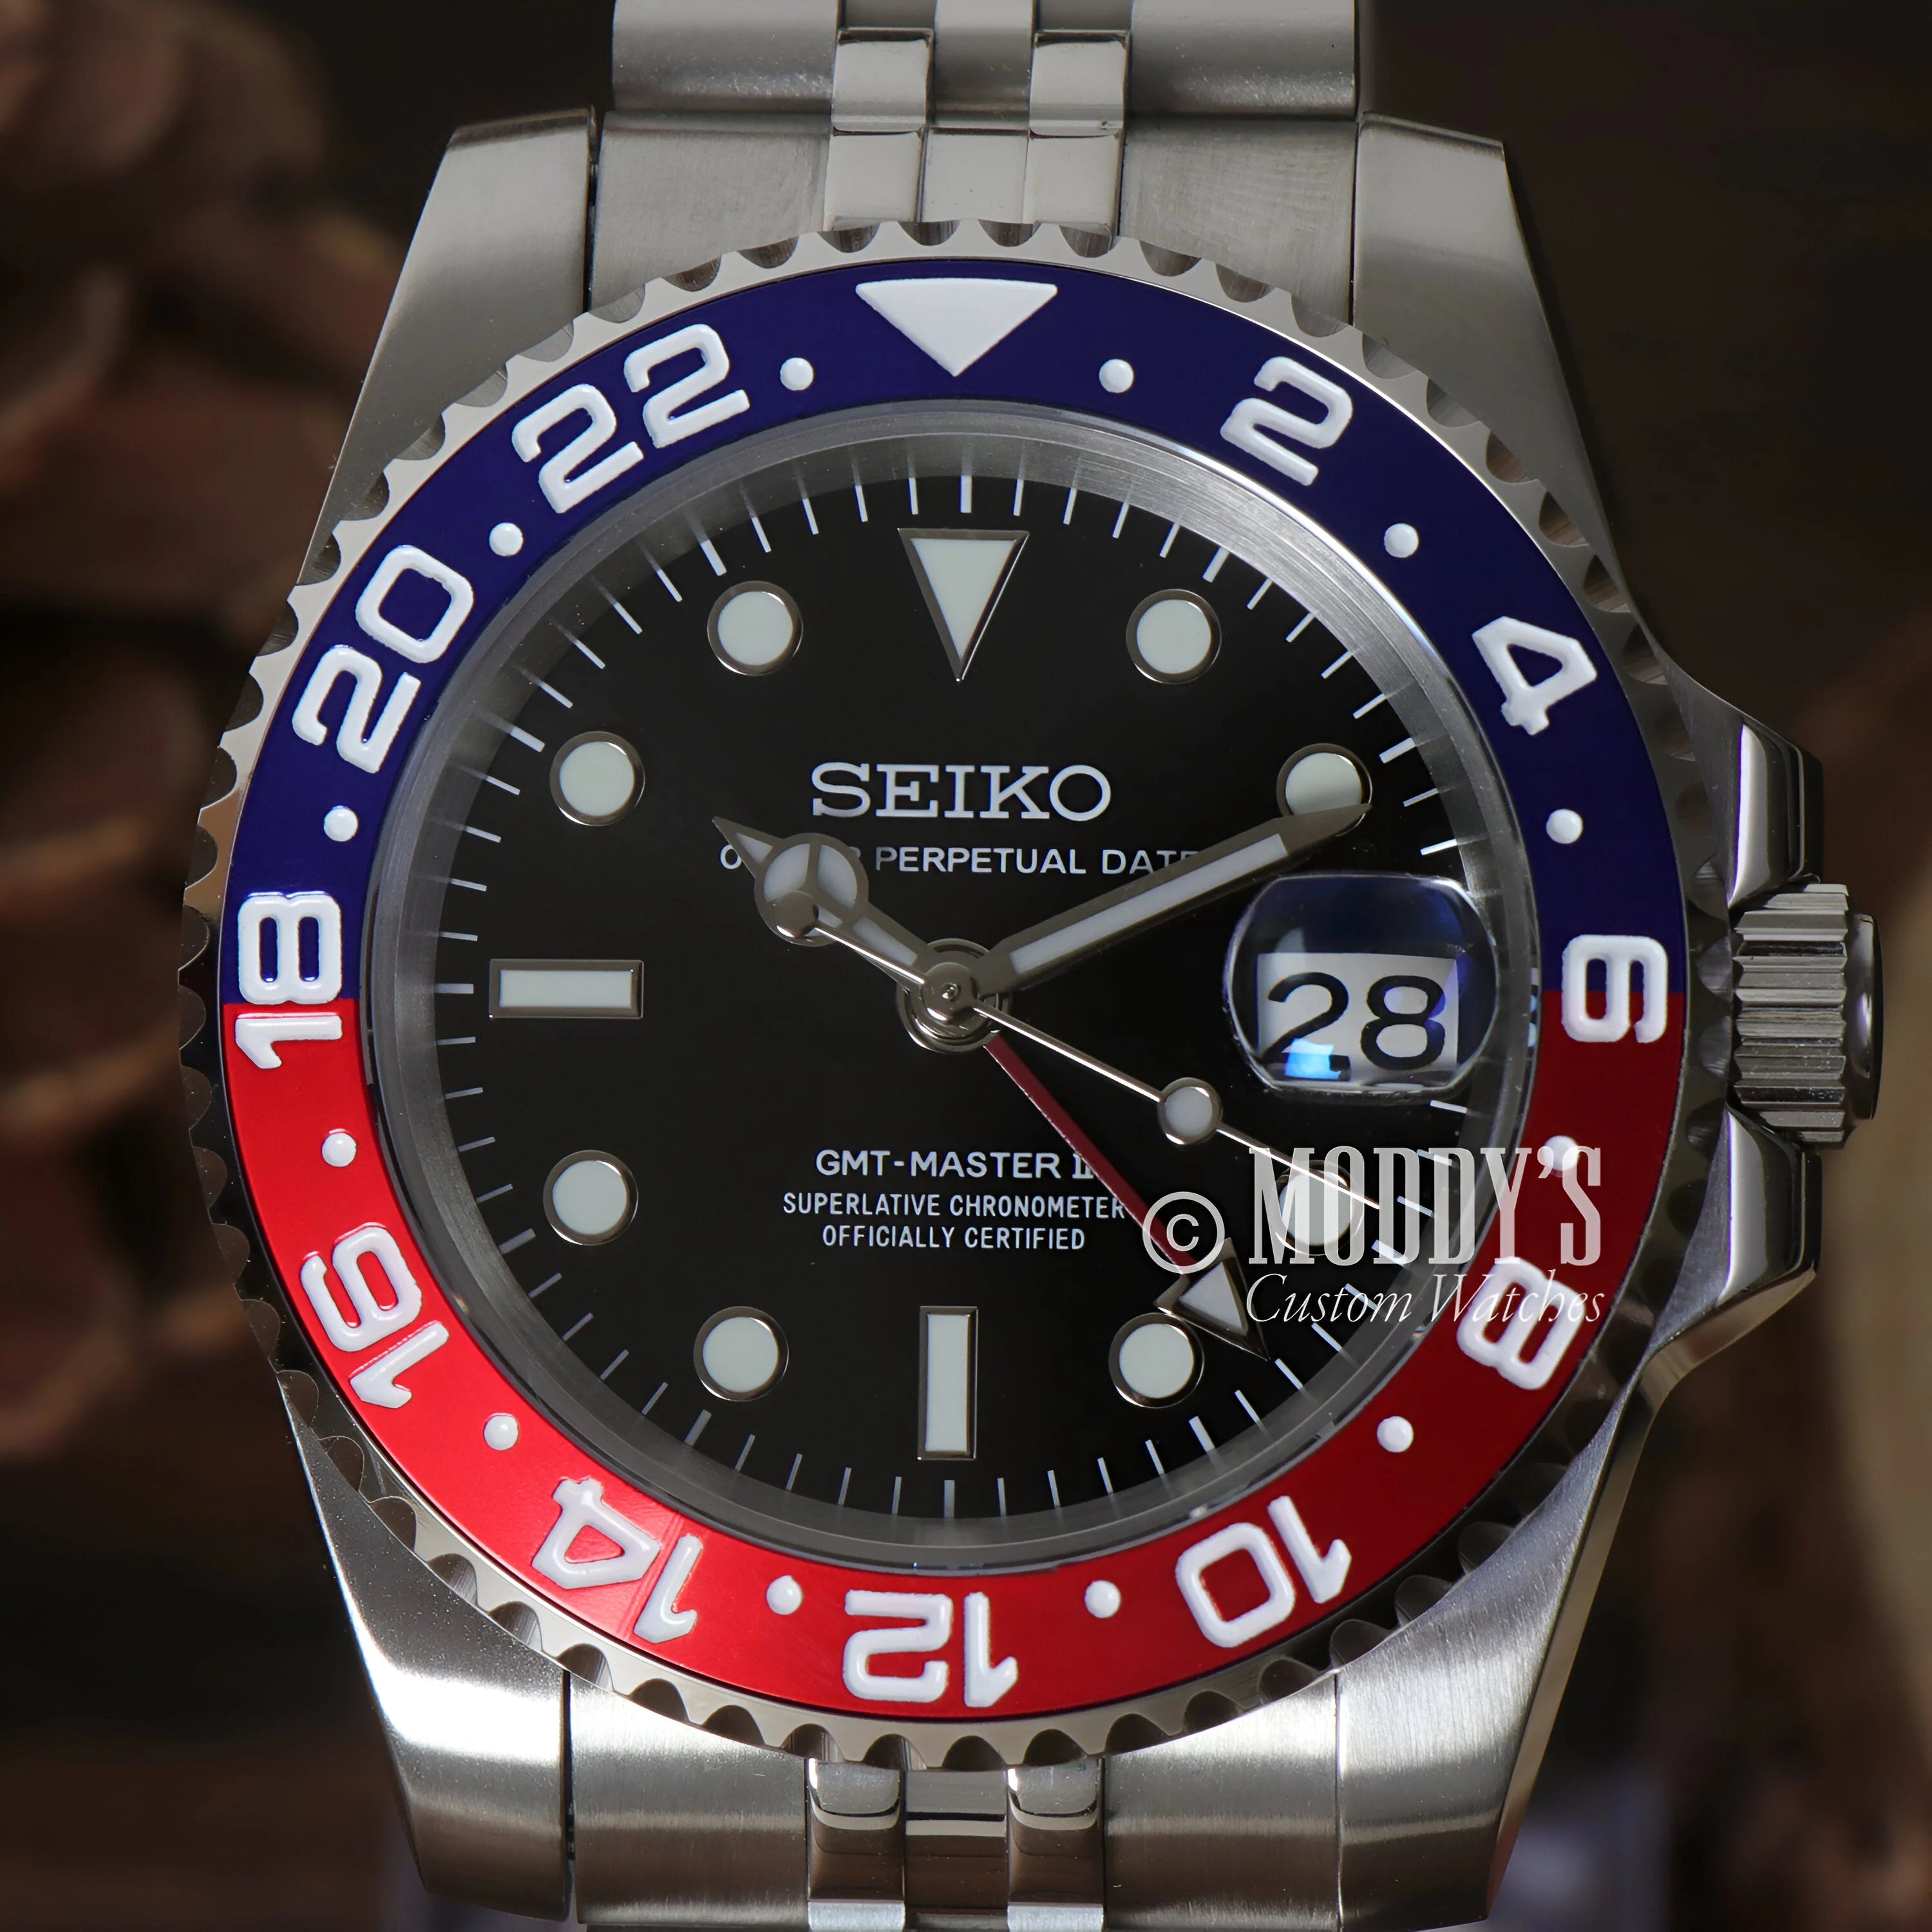 Gmteiko Pepsi Watch: Seiko Gmt-master Ii With Iconic Blue And Red ’pepsi’ Bezel Case